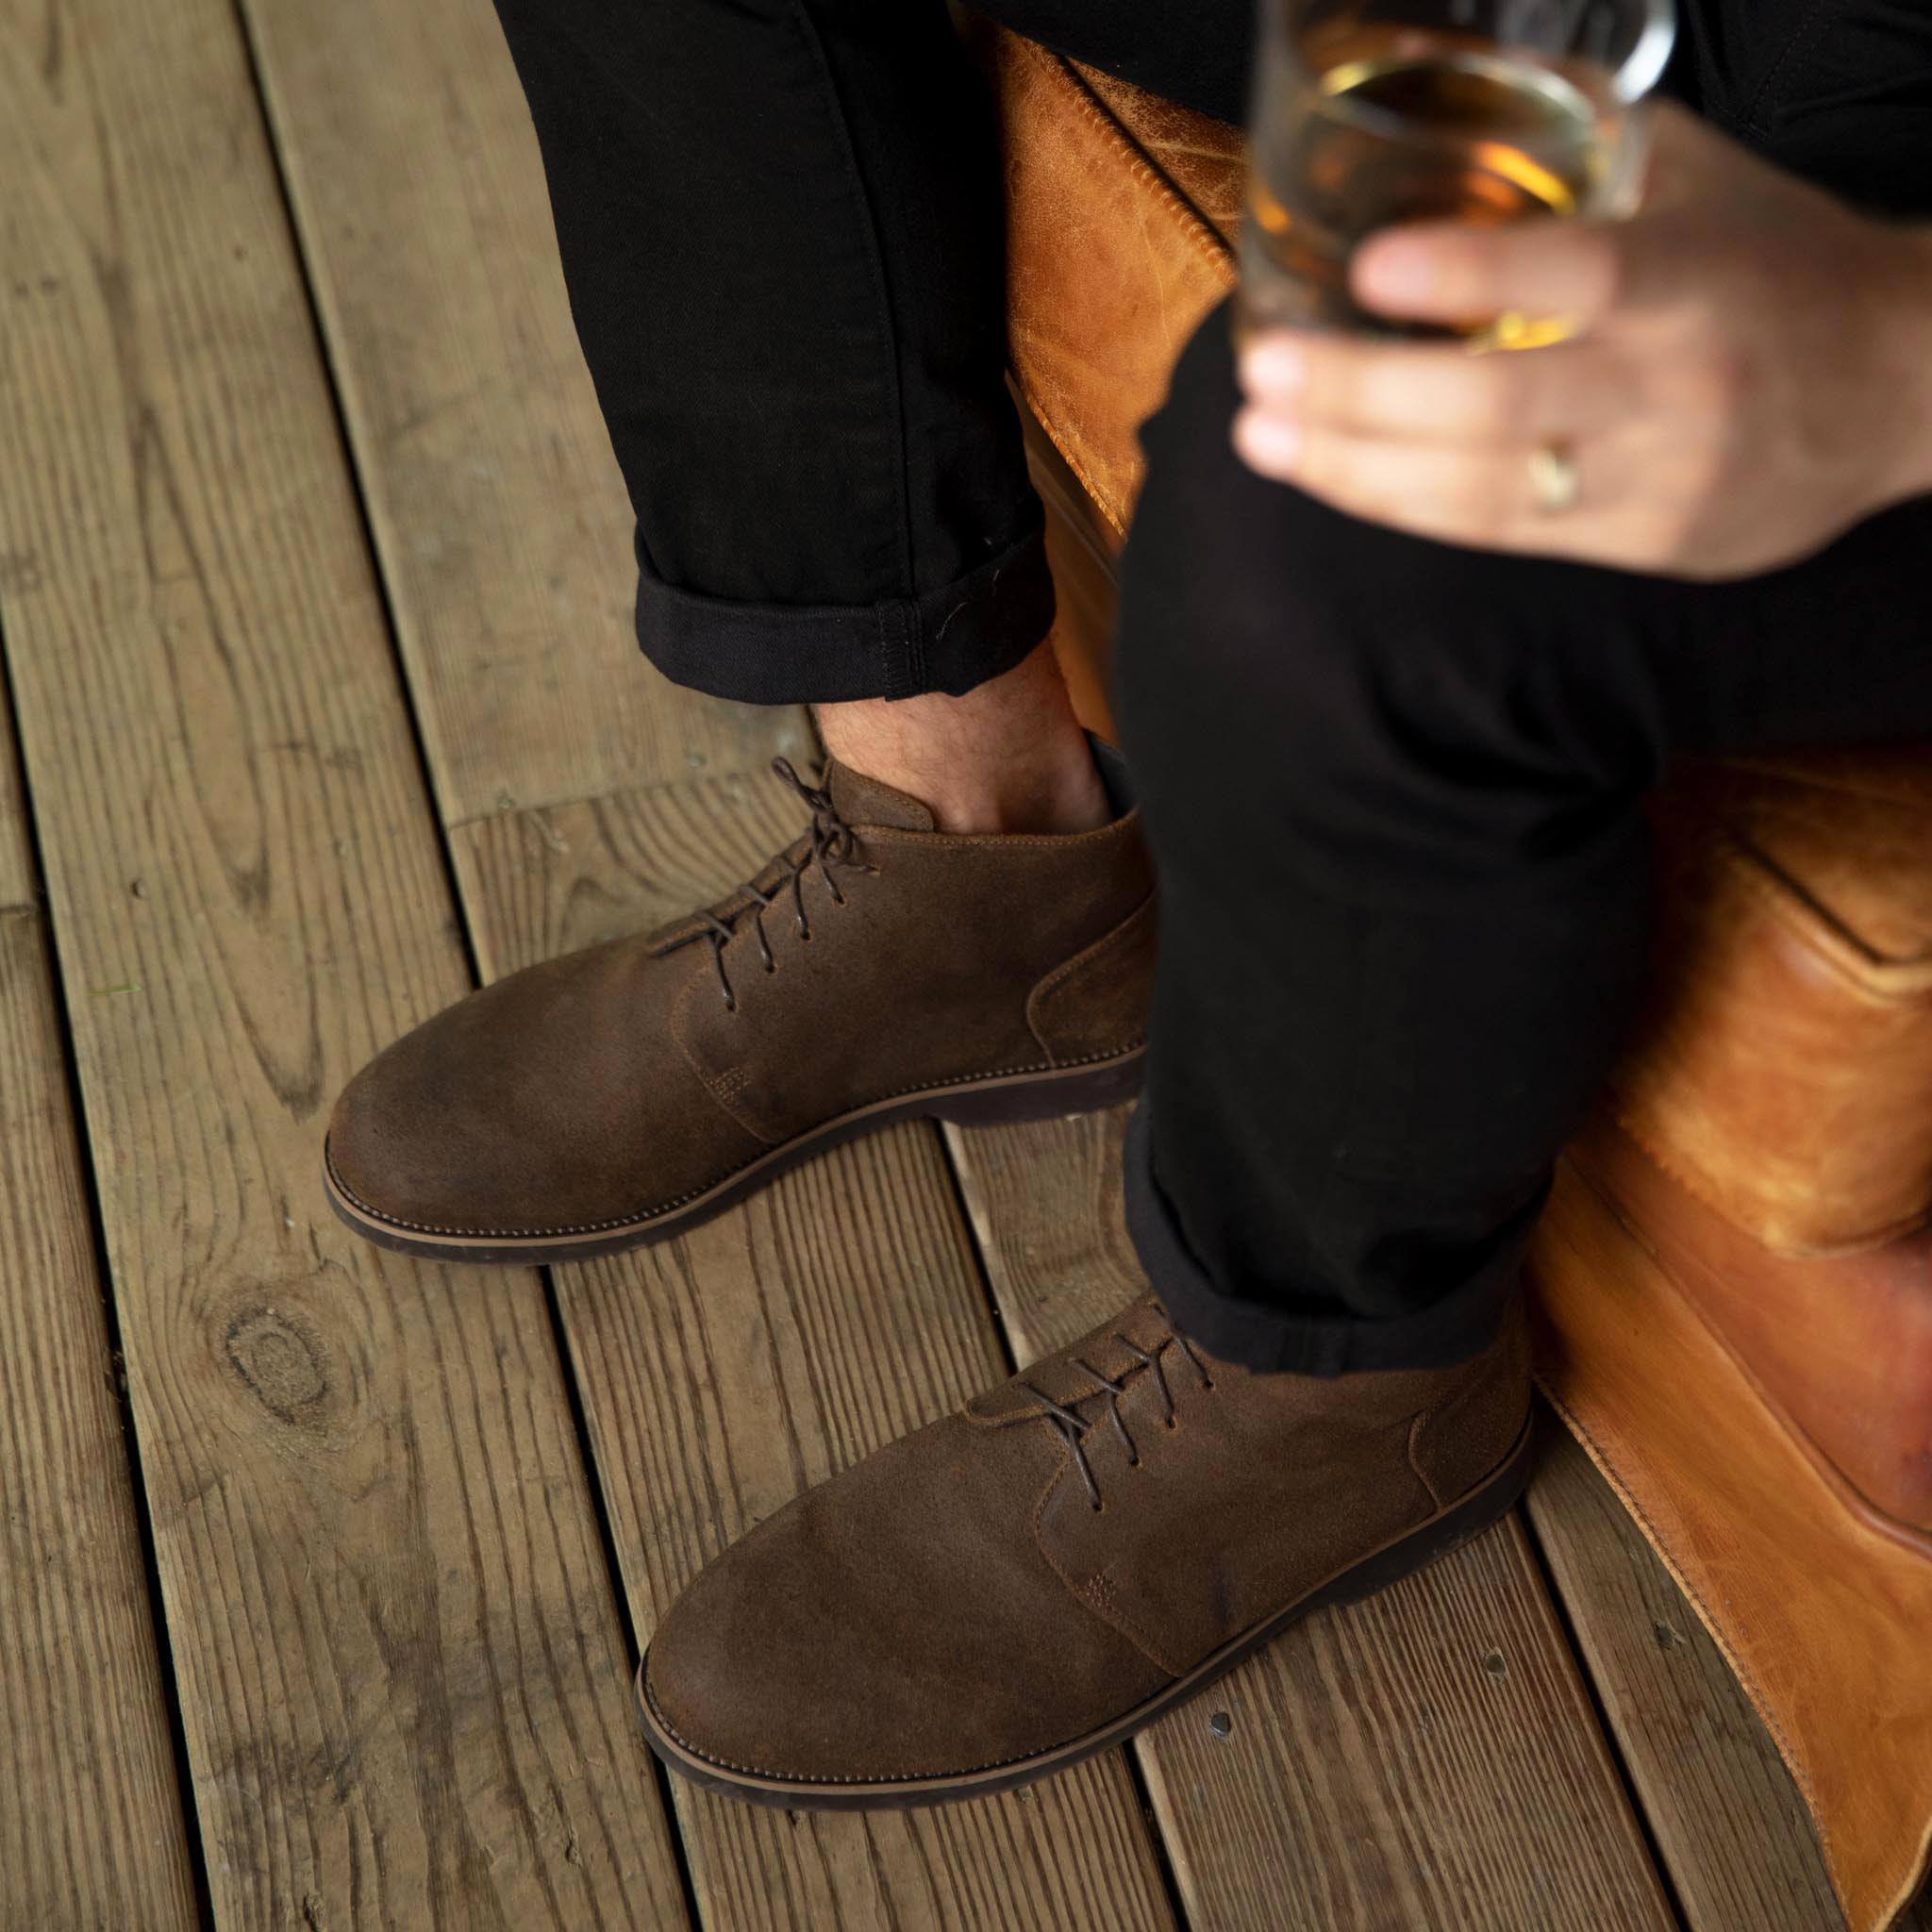 Image 5 of the Daytripper Chukka Boot Waxed Brown on model